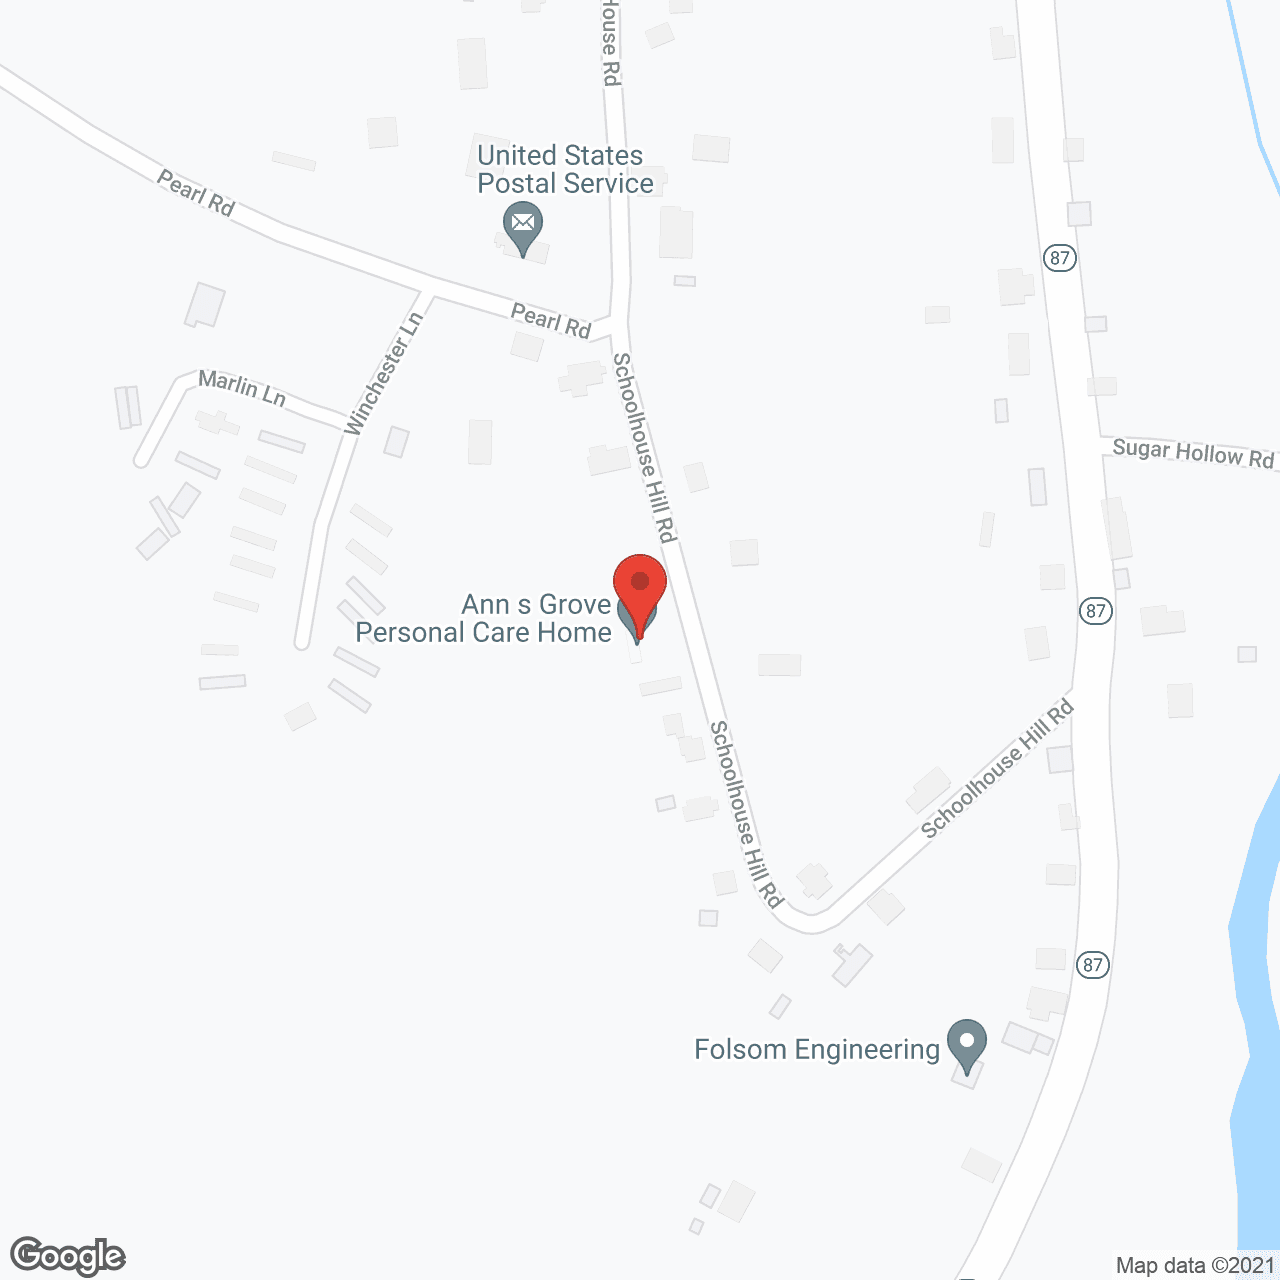 Ann S Grove Personal Care Home in google map